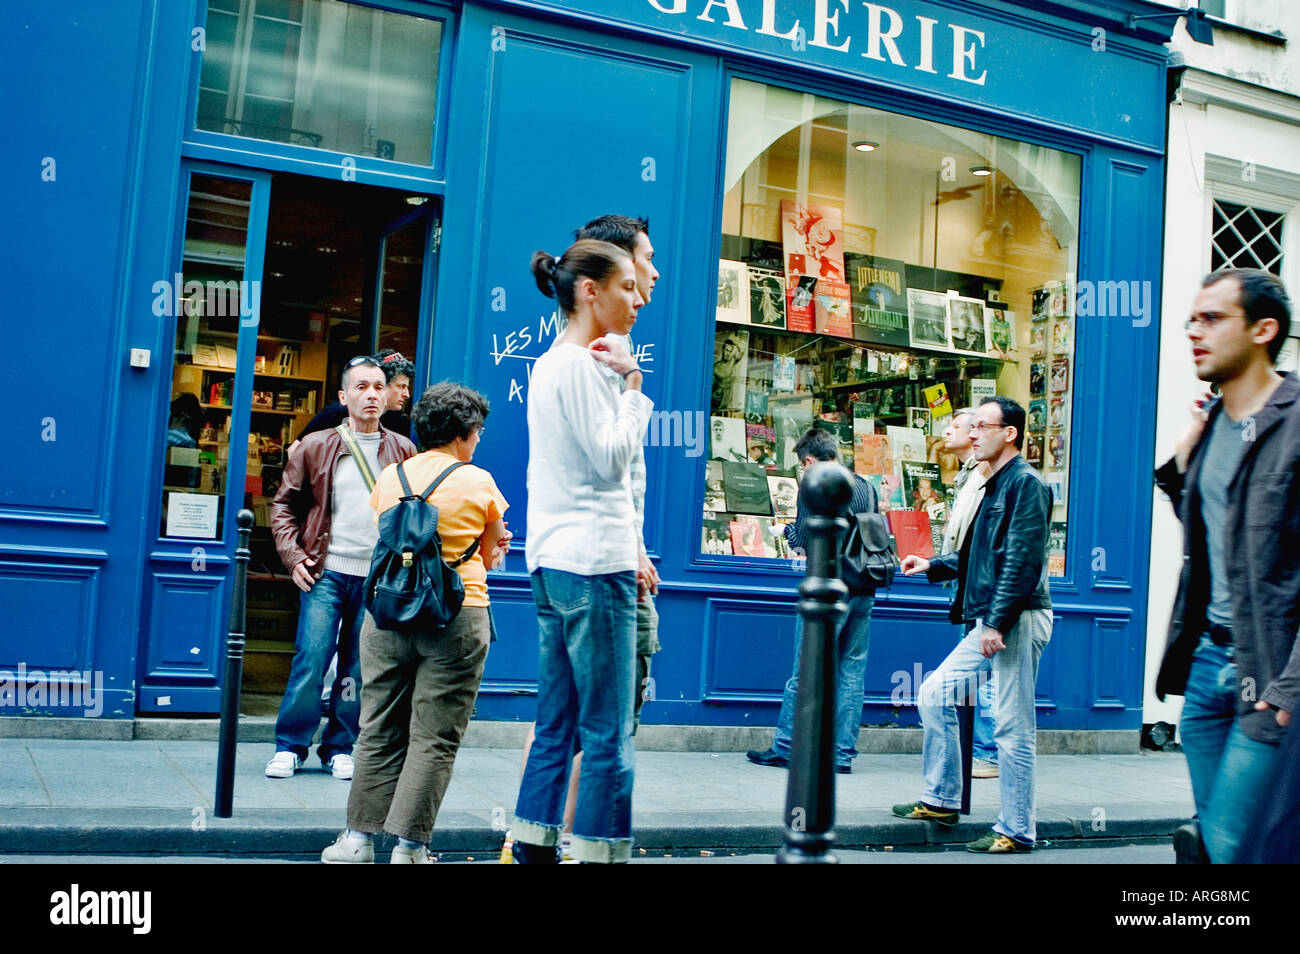 PARIS France, Street Scene with Facade of 'Les Mots à la Bouche' Gay Bookstore crowd people walking, old French storefront, small book store Stock Photo